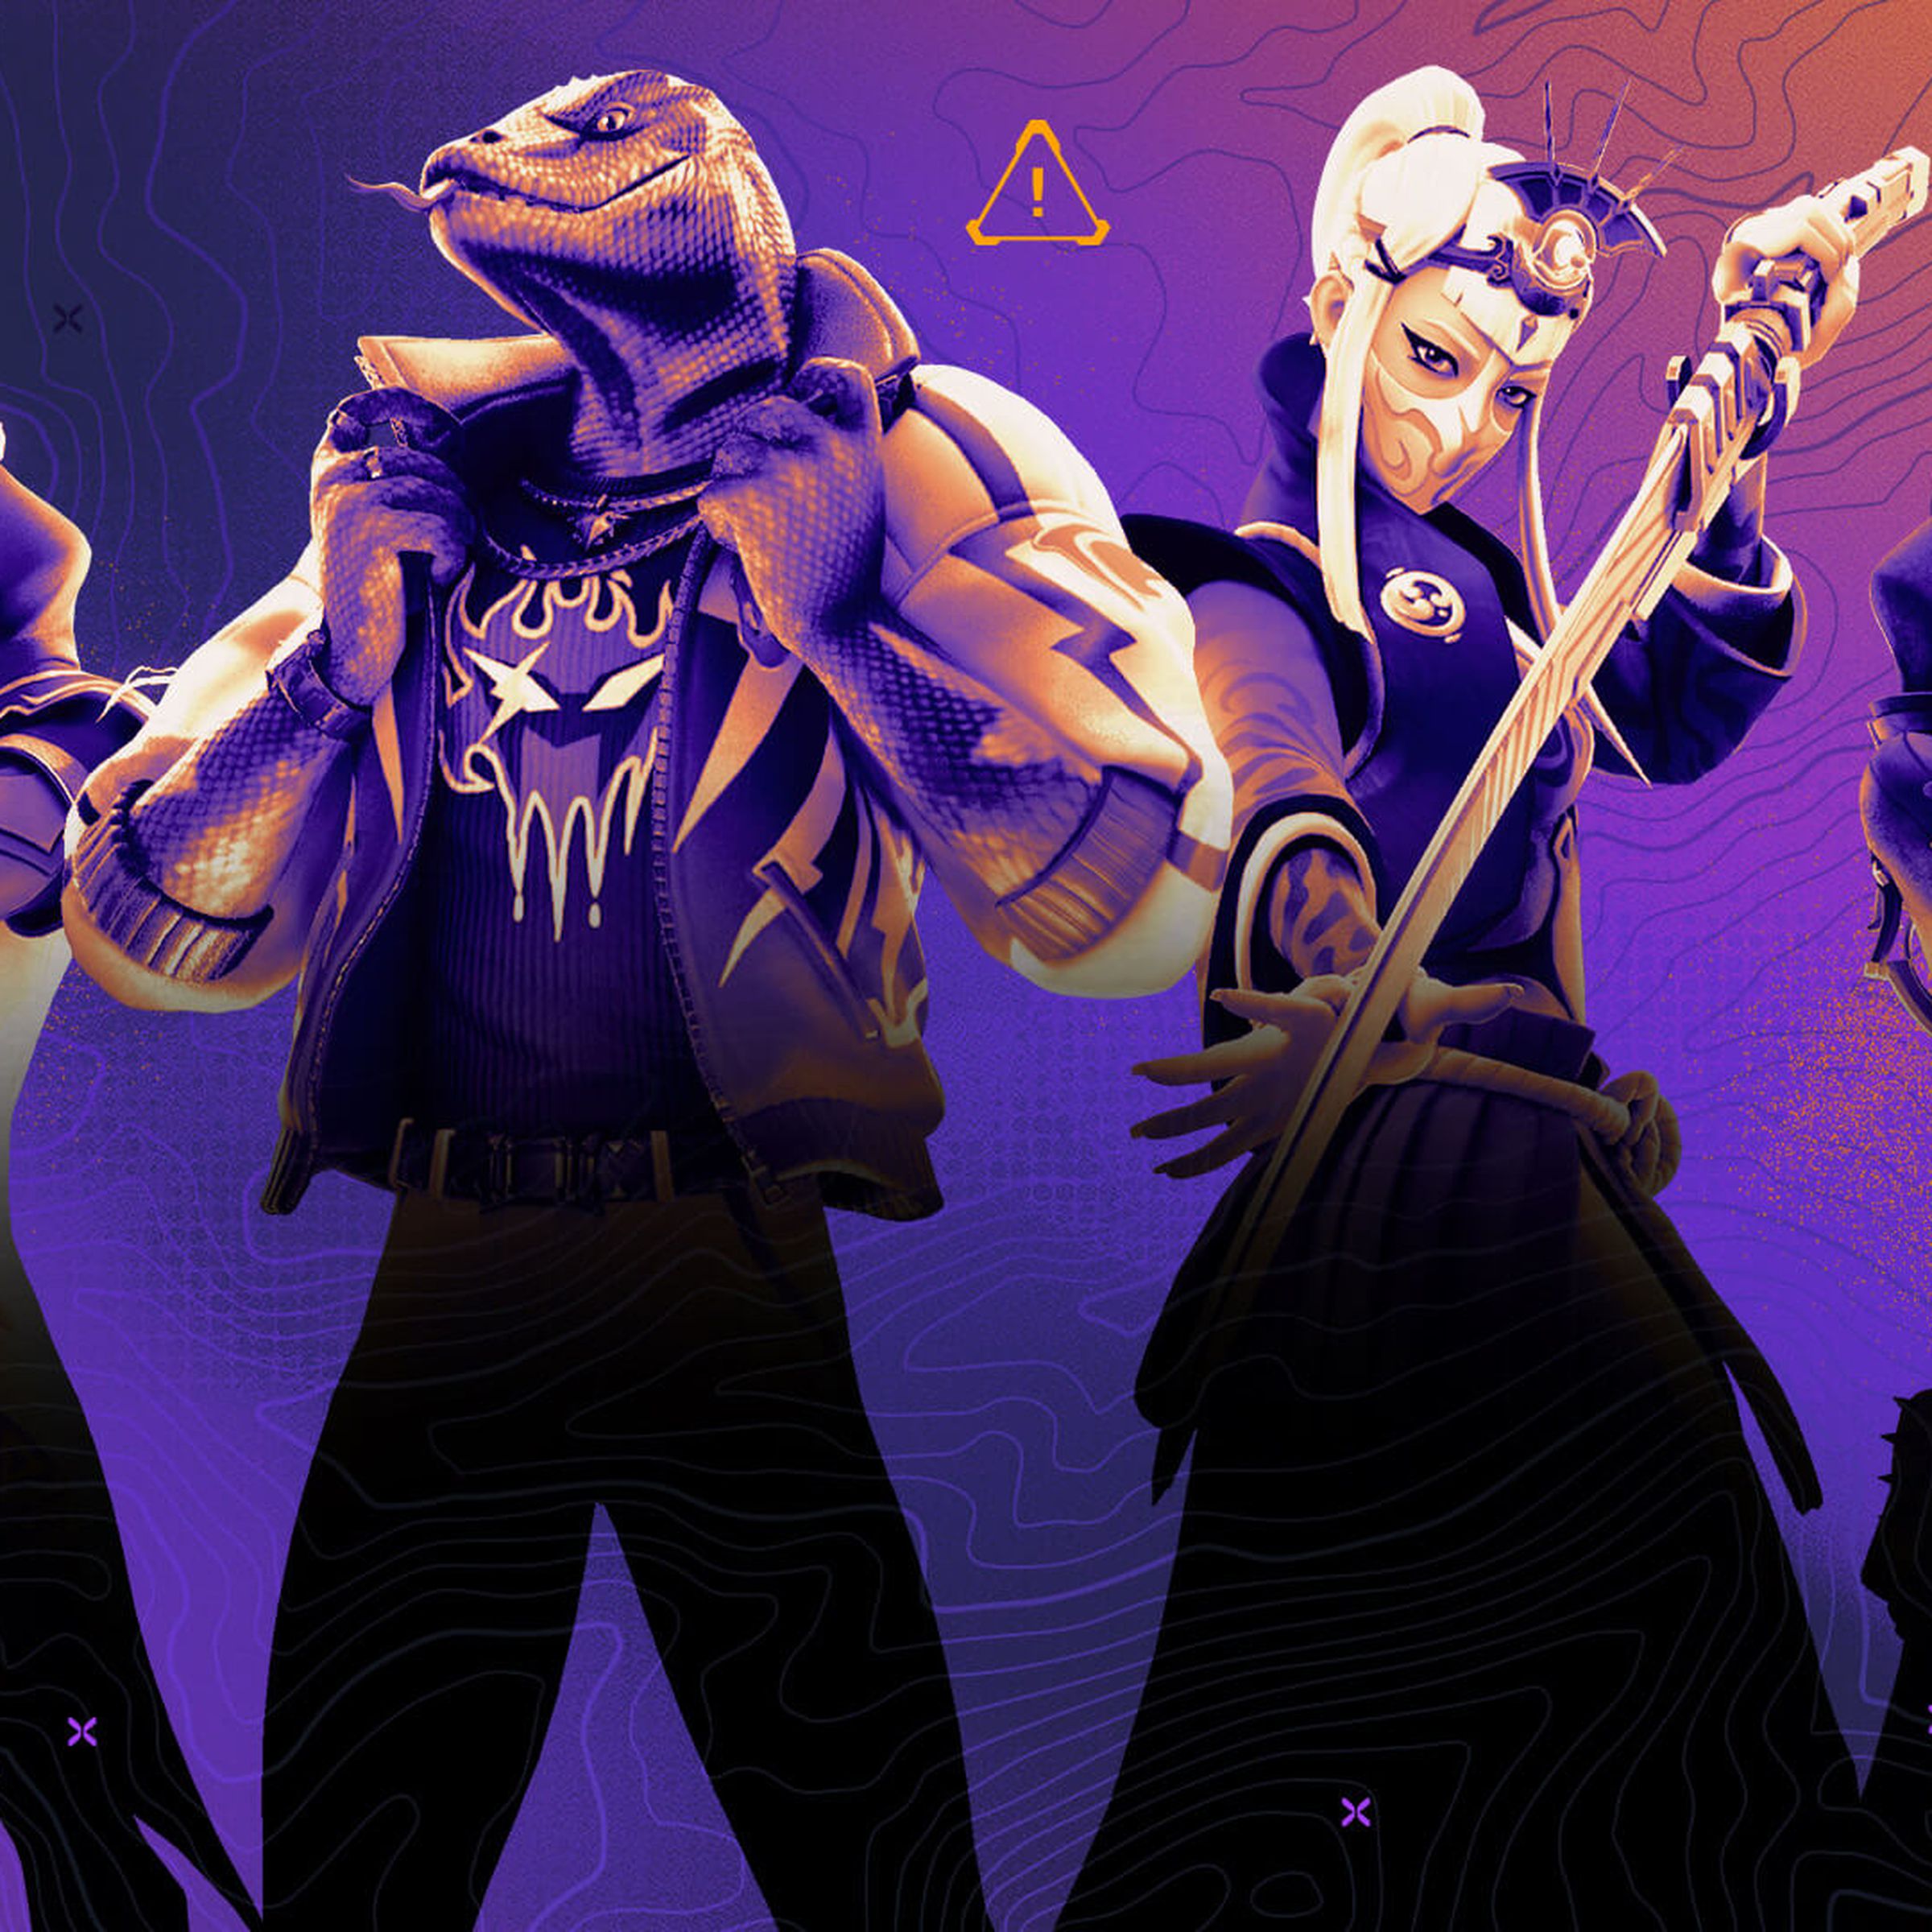 Four Fortnite characters in a promotional image for the game.